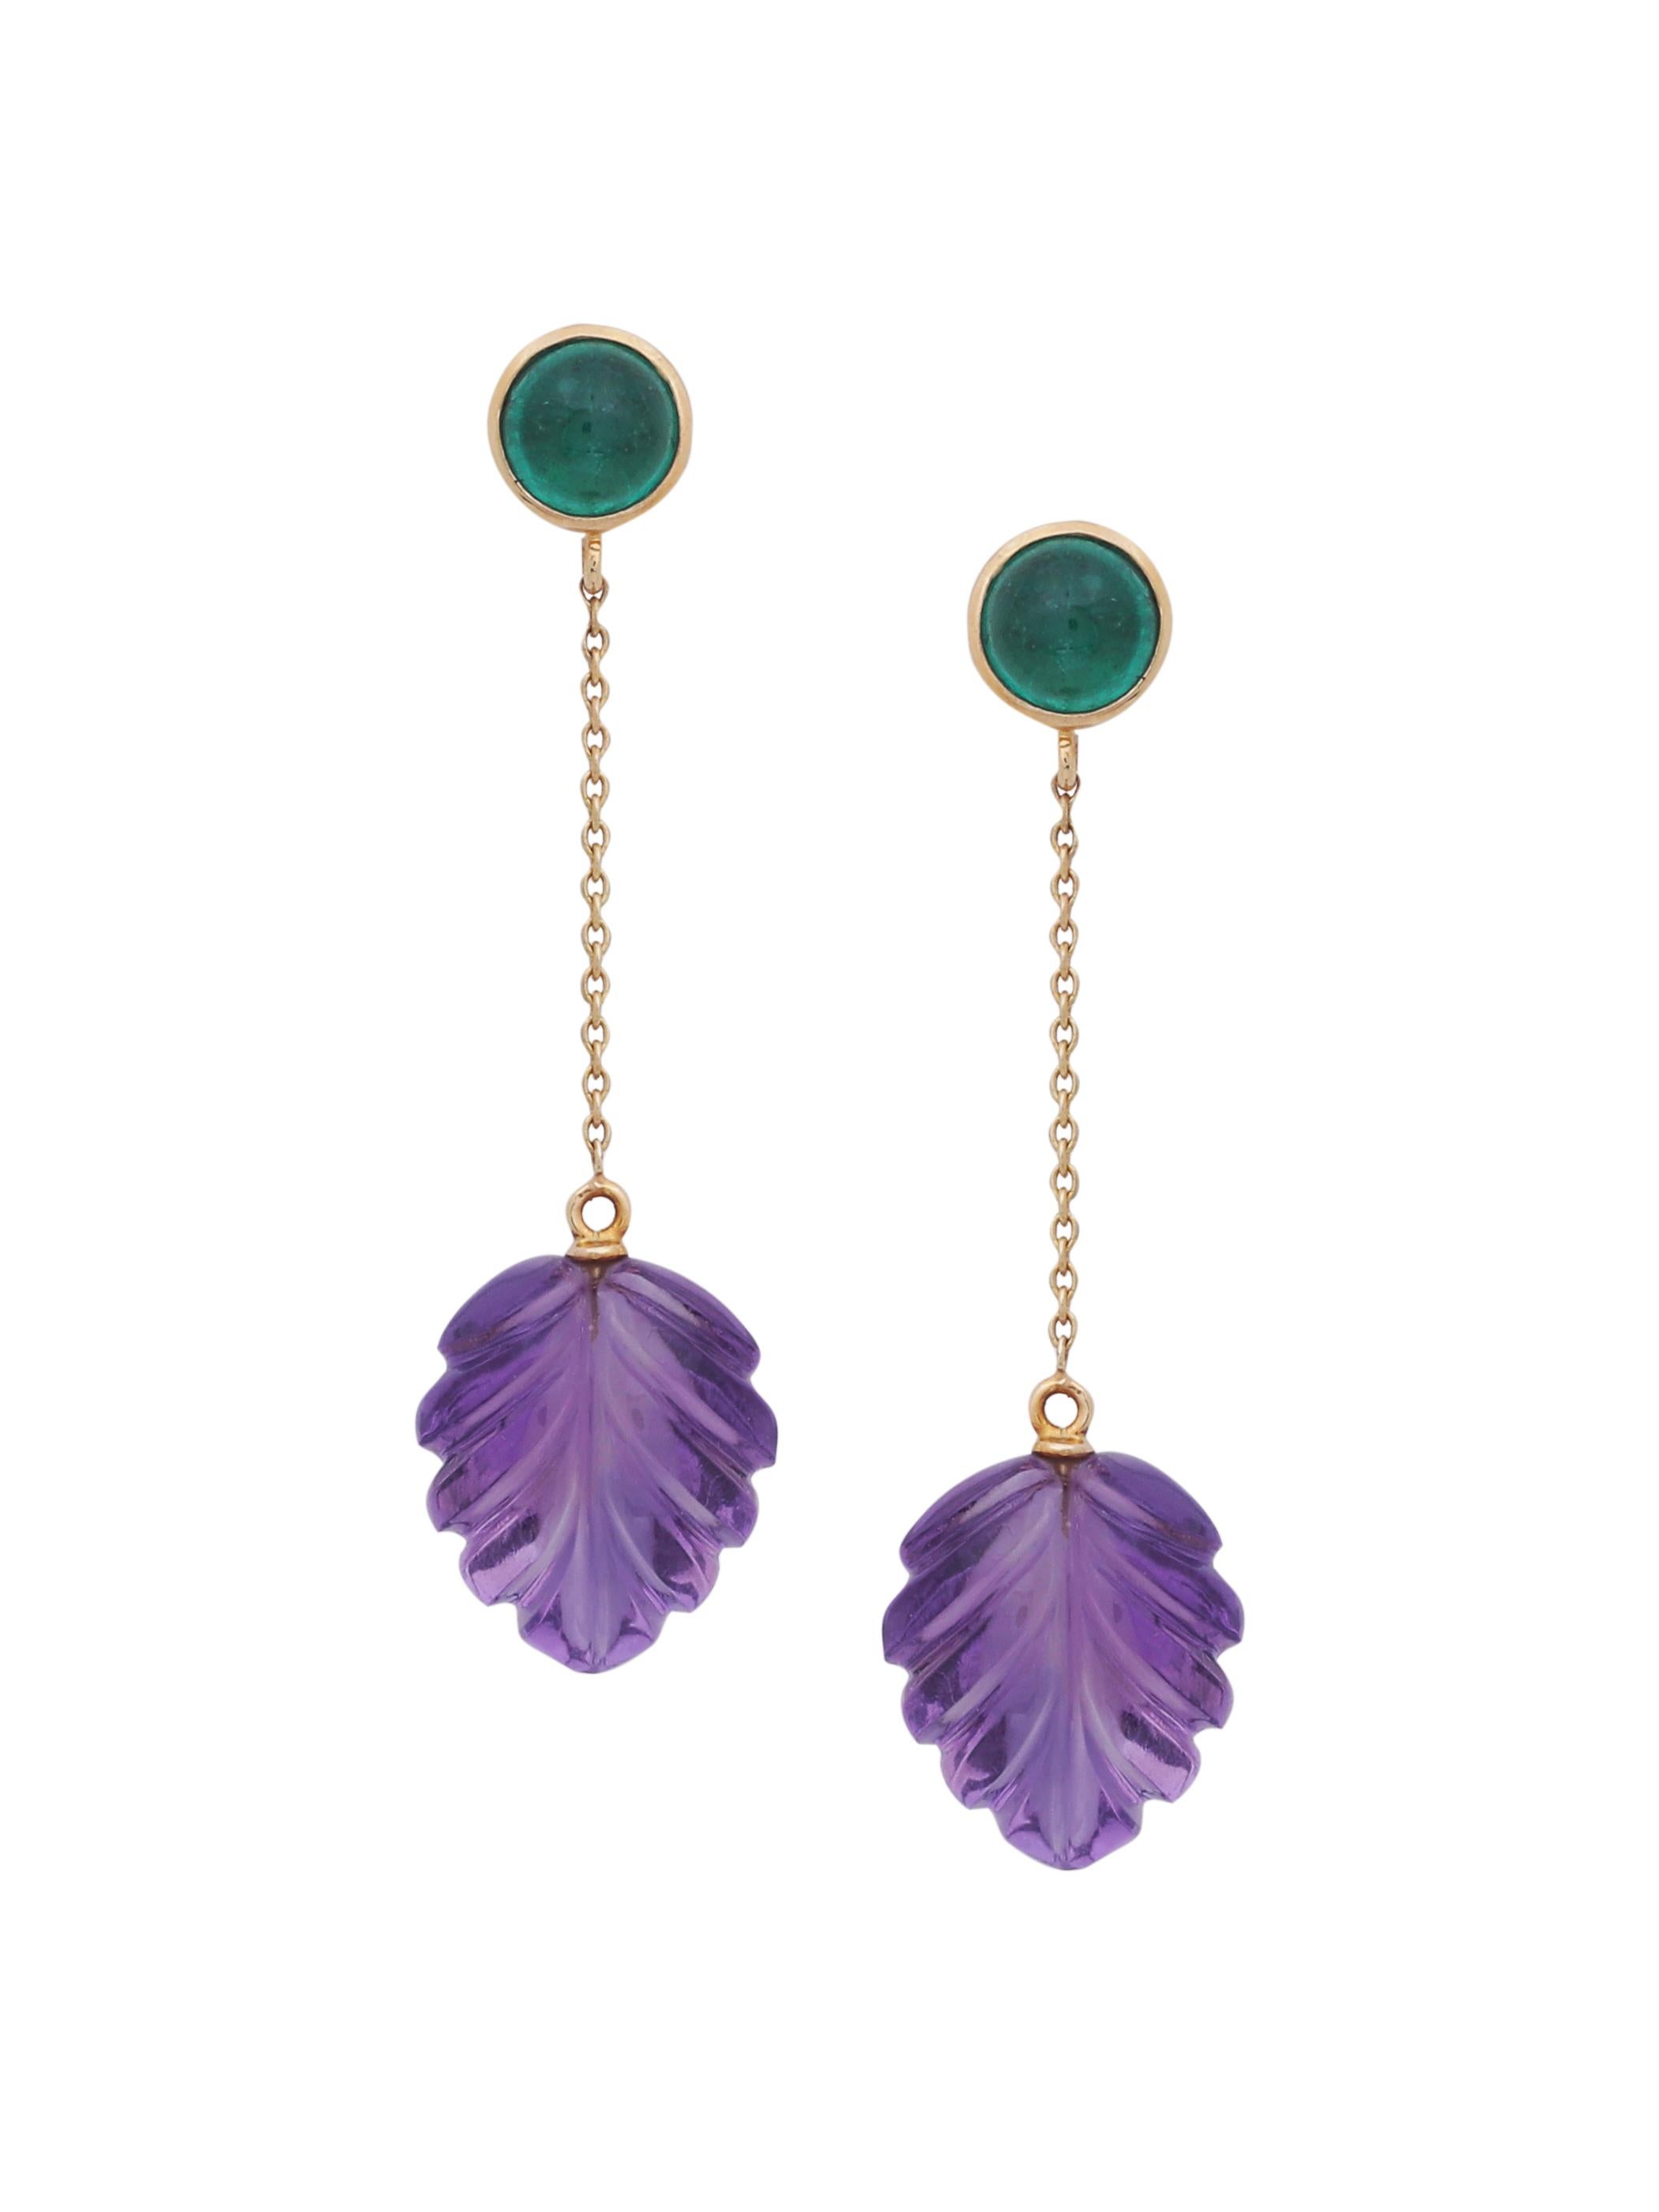 Emerald Cabochon and Amethyst Carved Leaves Earrings Handmade in 18K Yellow Gold In New Condition For Sale In Jaipur, IN